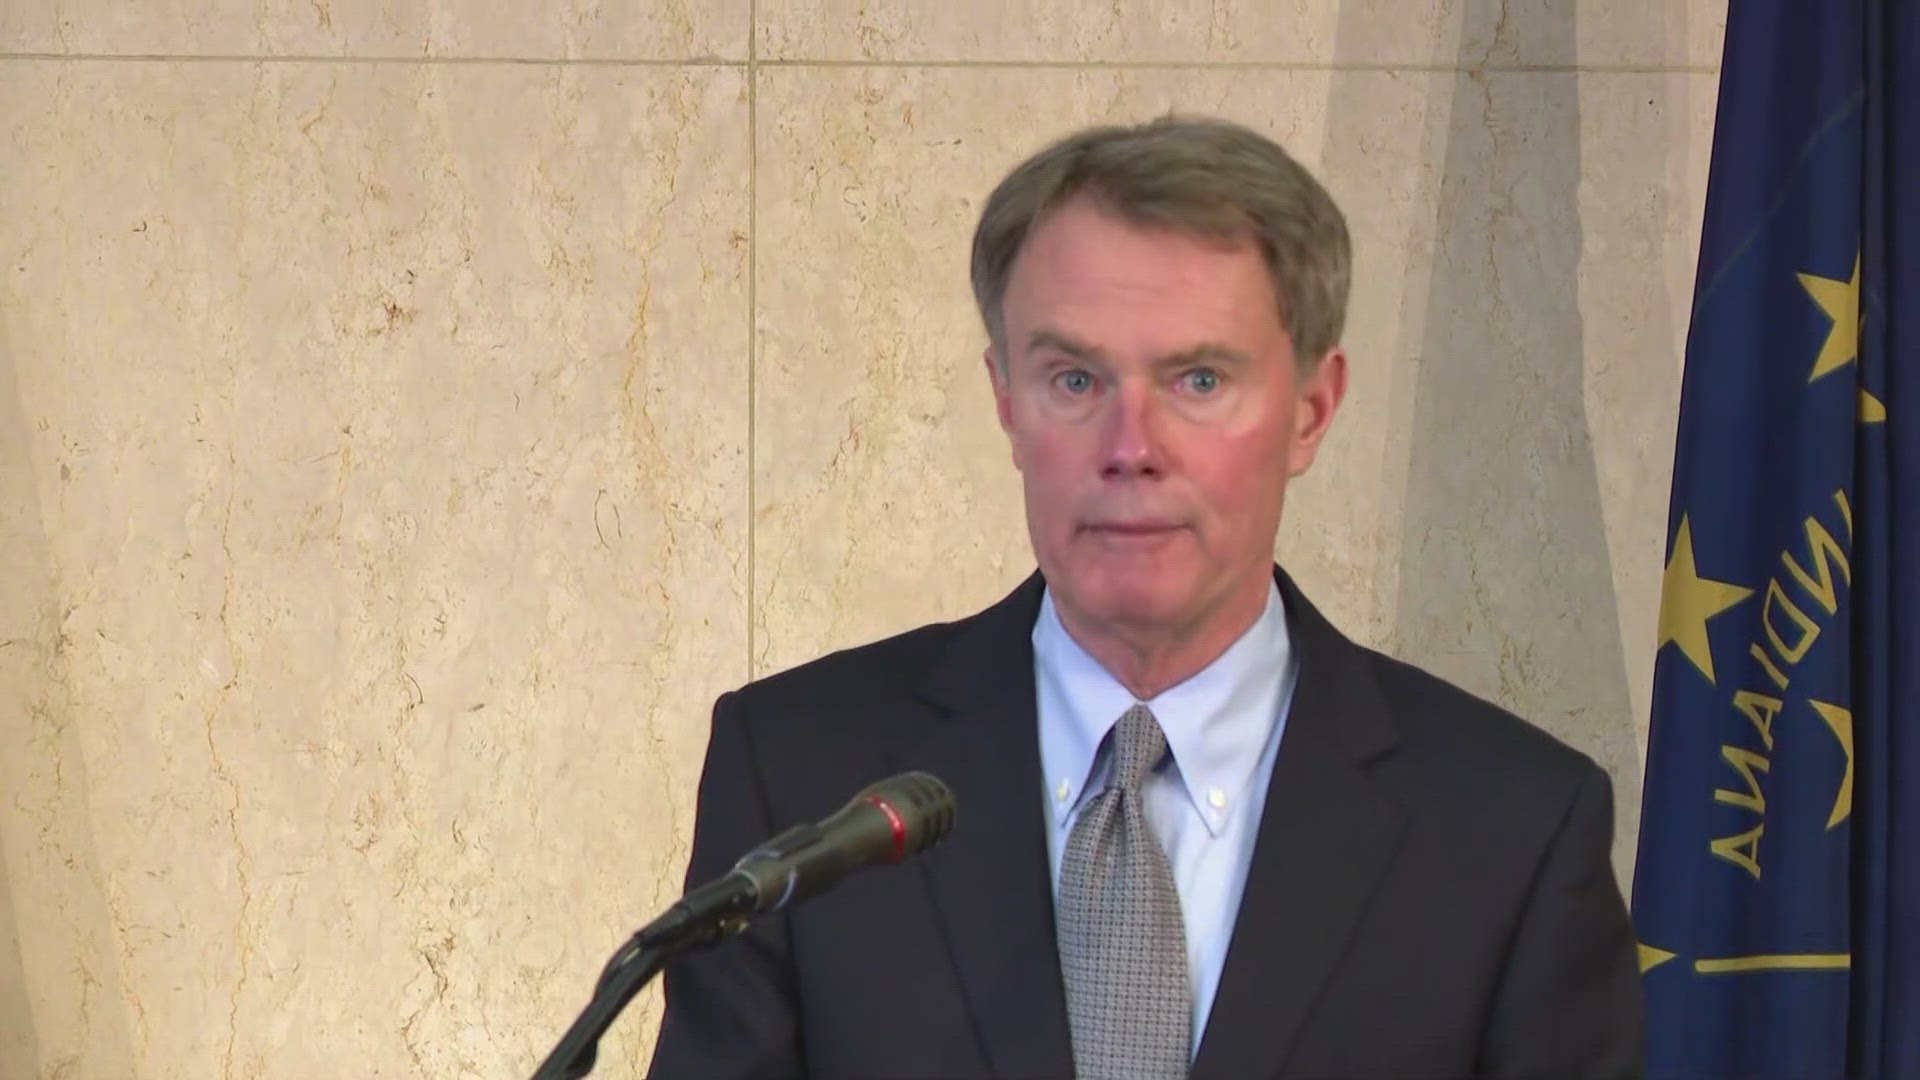 Indianapolis mayor Joe Hogsett says he has started an initiative to bring Major League Soccer to Indianapolis.